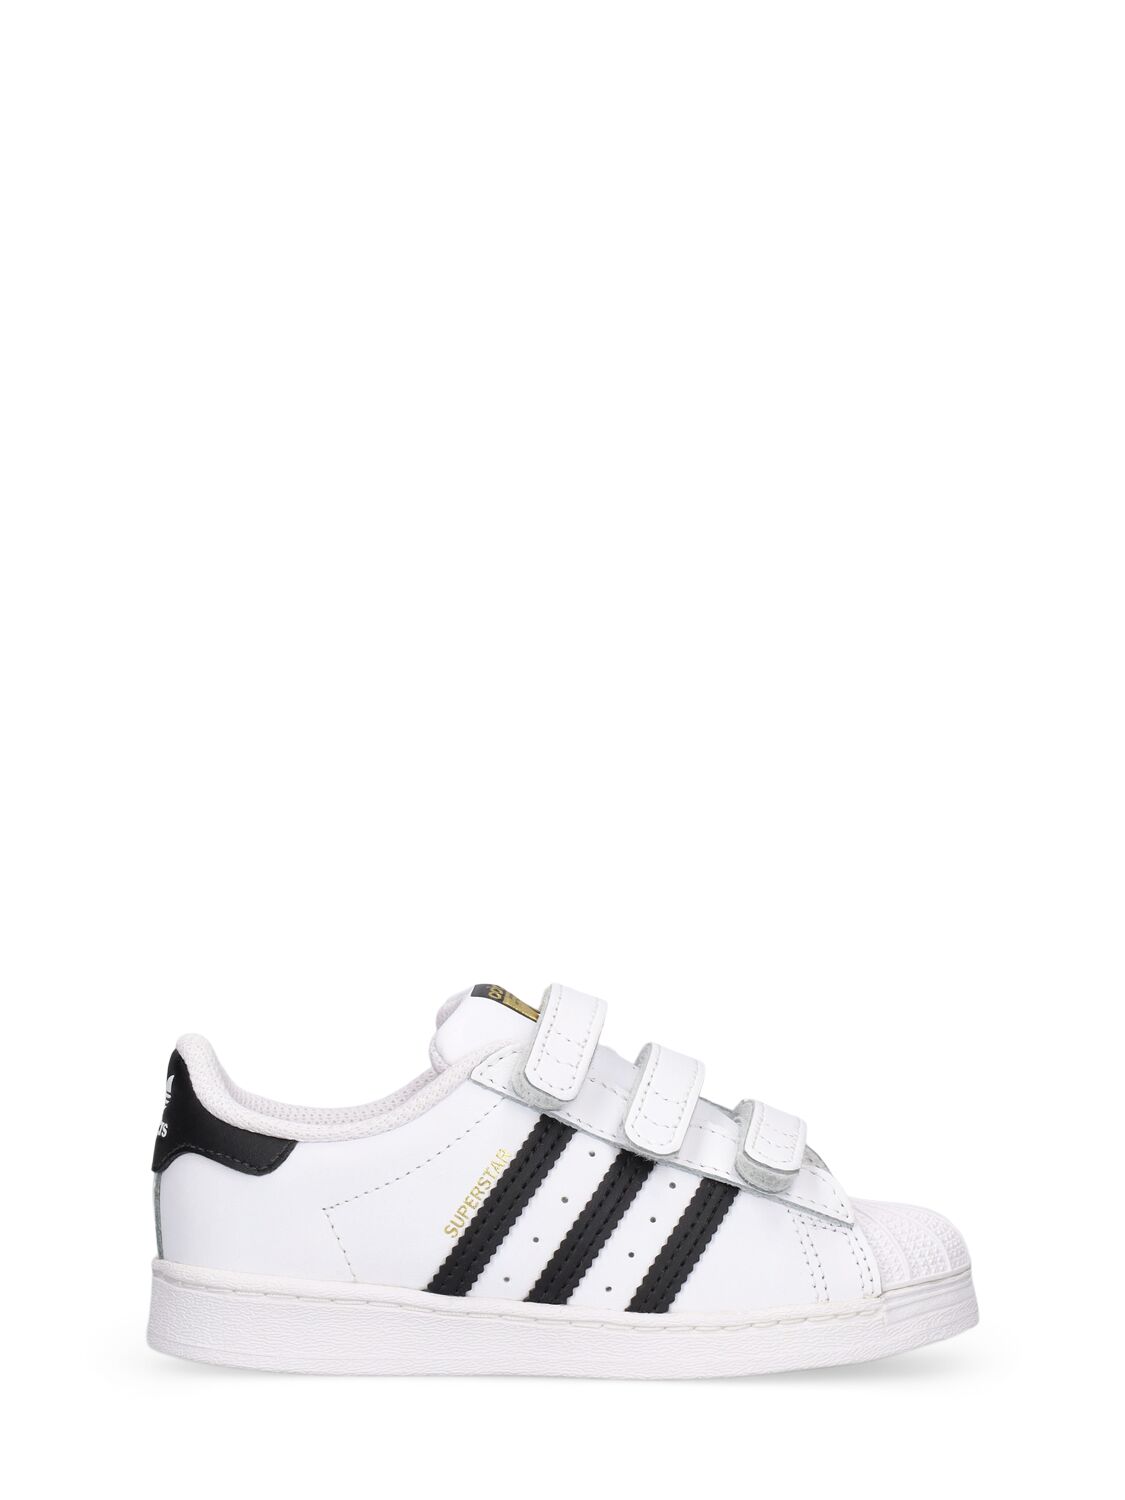 Image of Superstar Leather Strap Sneakers